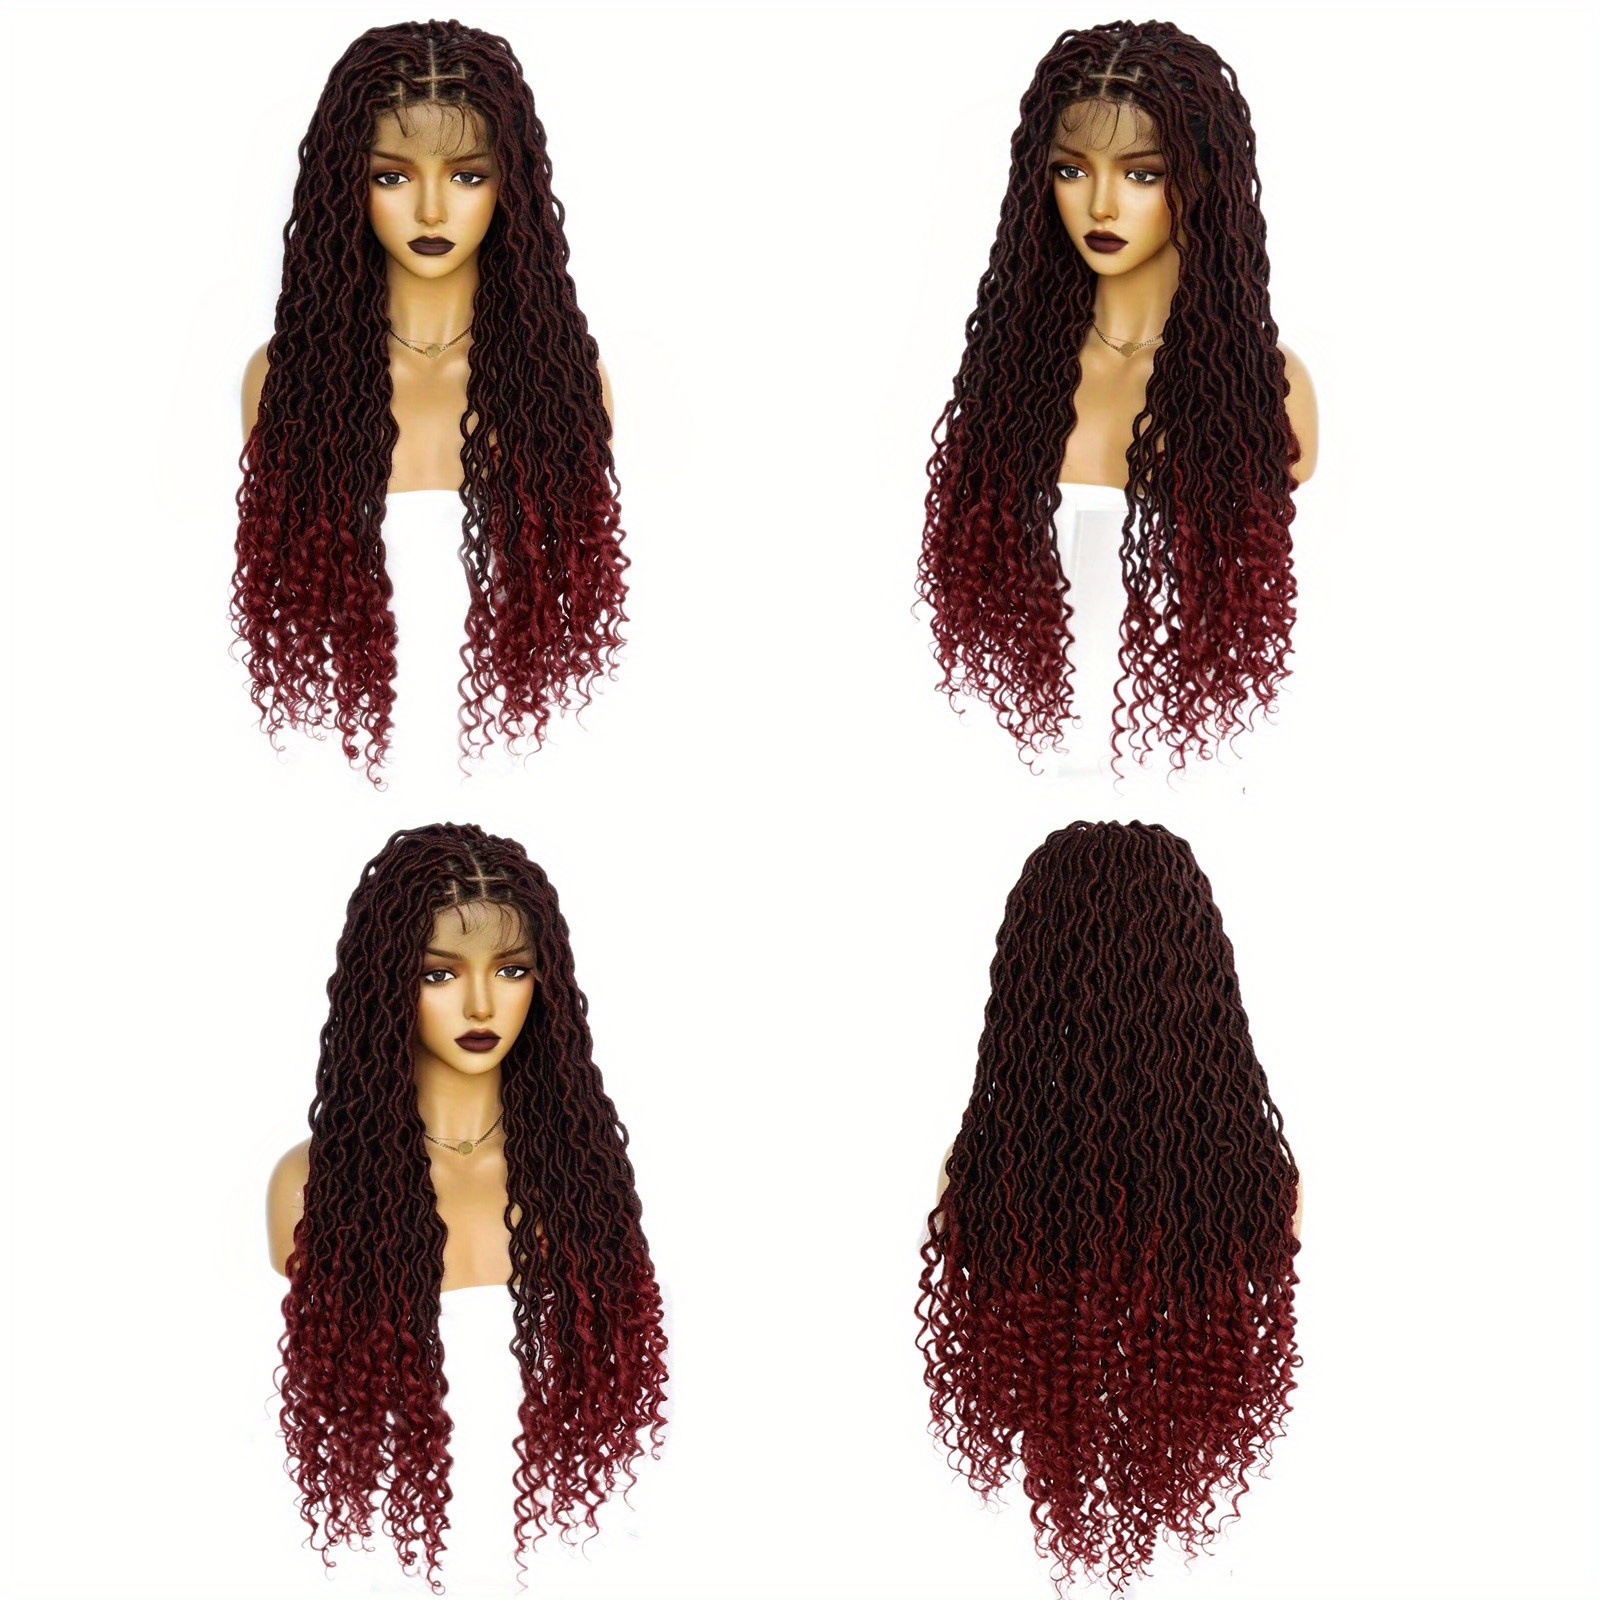 High Density 14 Inch Lace Front Braided Wig Black/Brown Box Braids